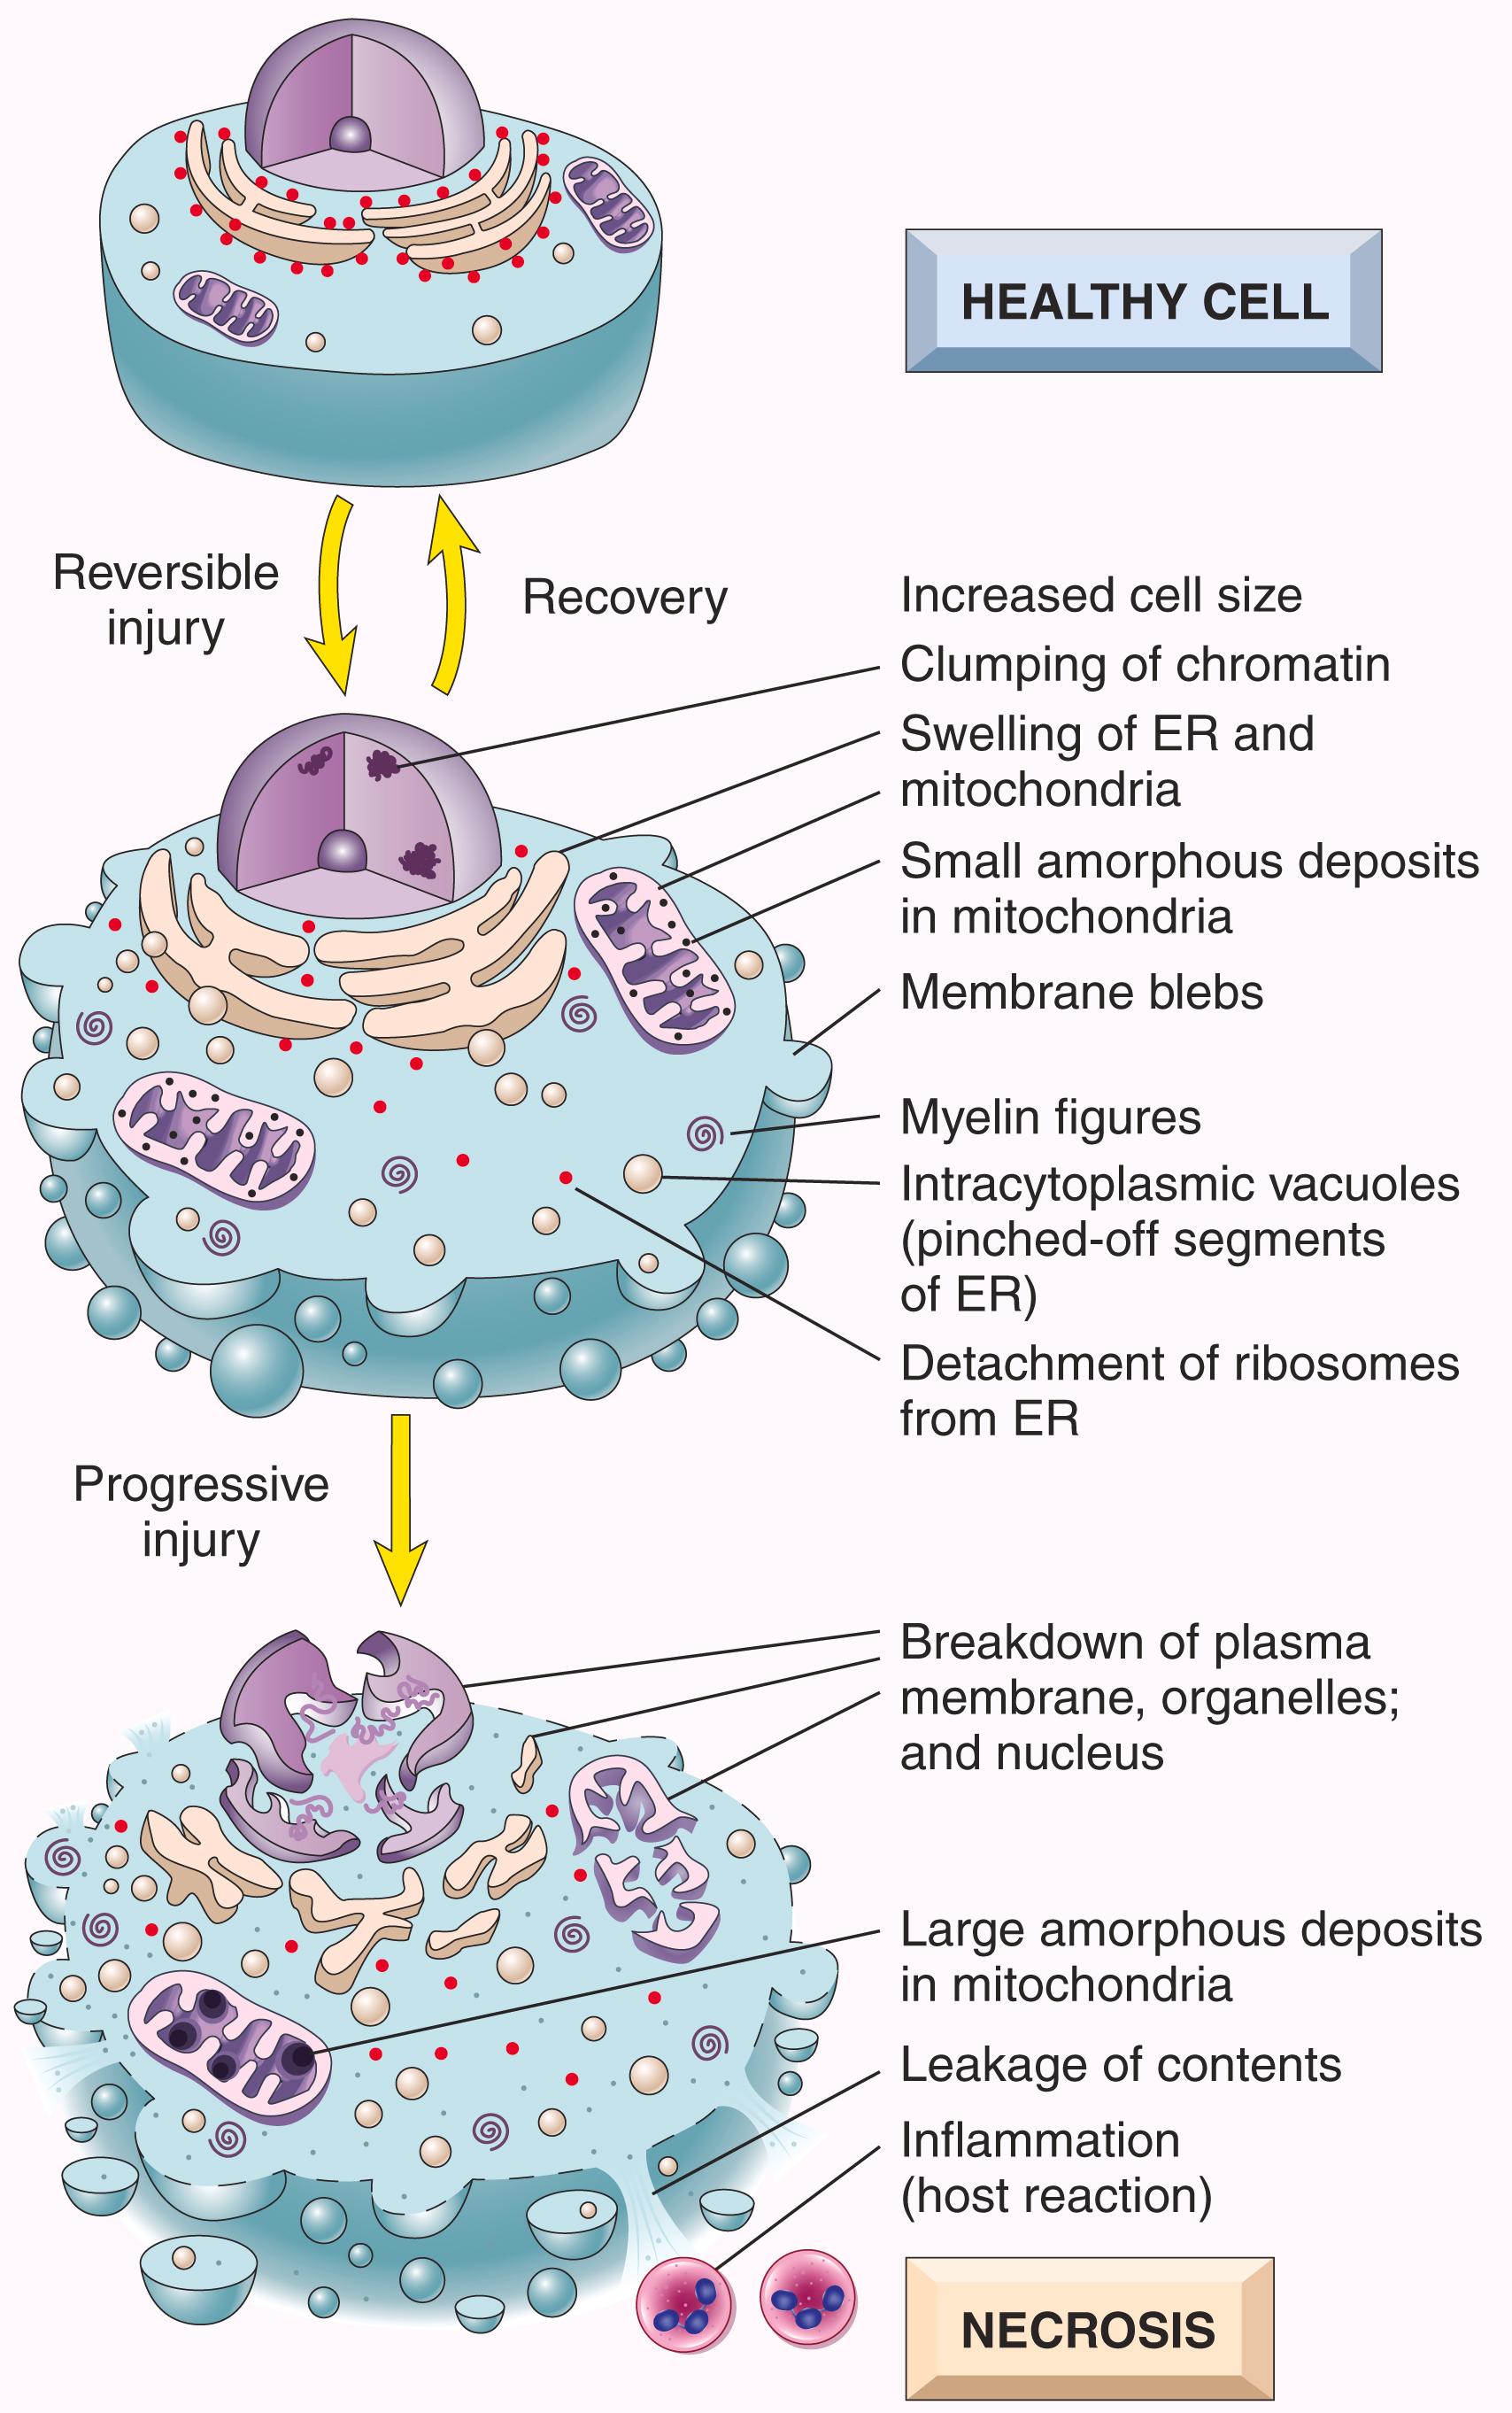 FIG. 1.3, Reversible cell injury and necrosis. The principal cellular alterations that characterize reversible cell injury and necrosis are illustrated. If an injurious stimulus is not removed, reversible injury culminates in necrosis.